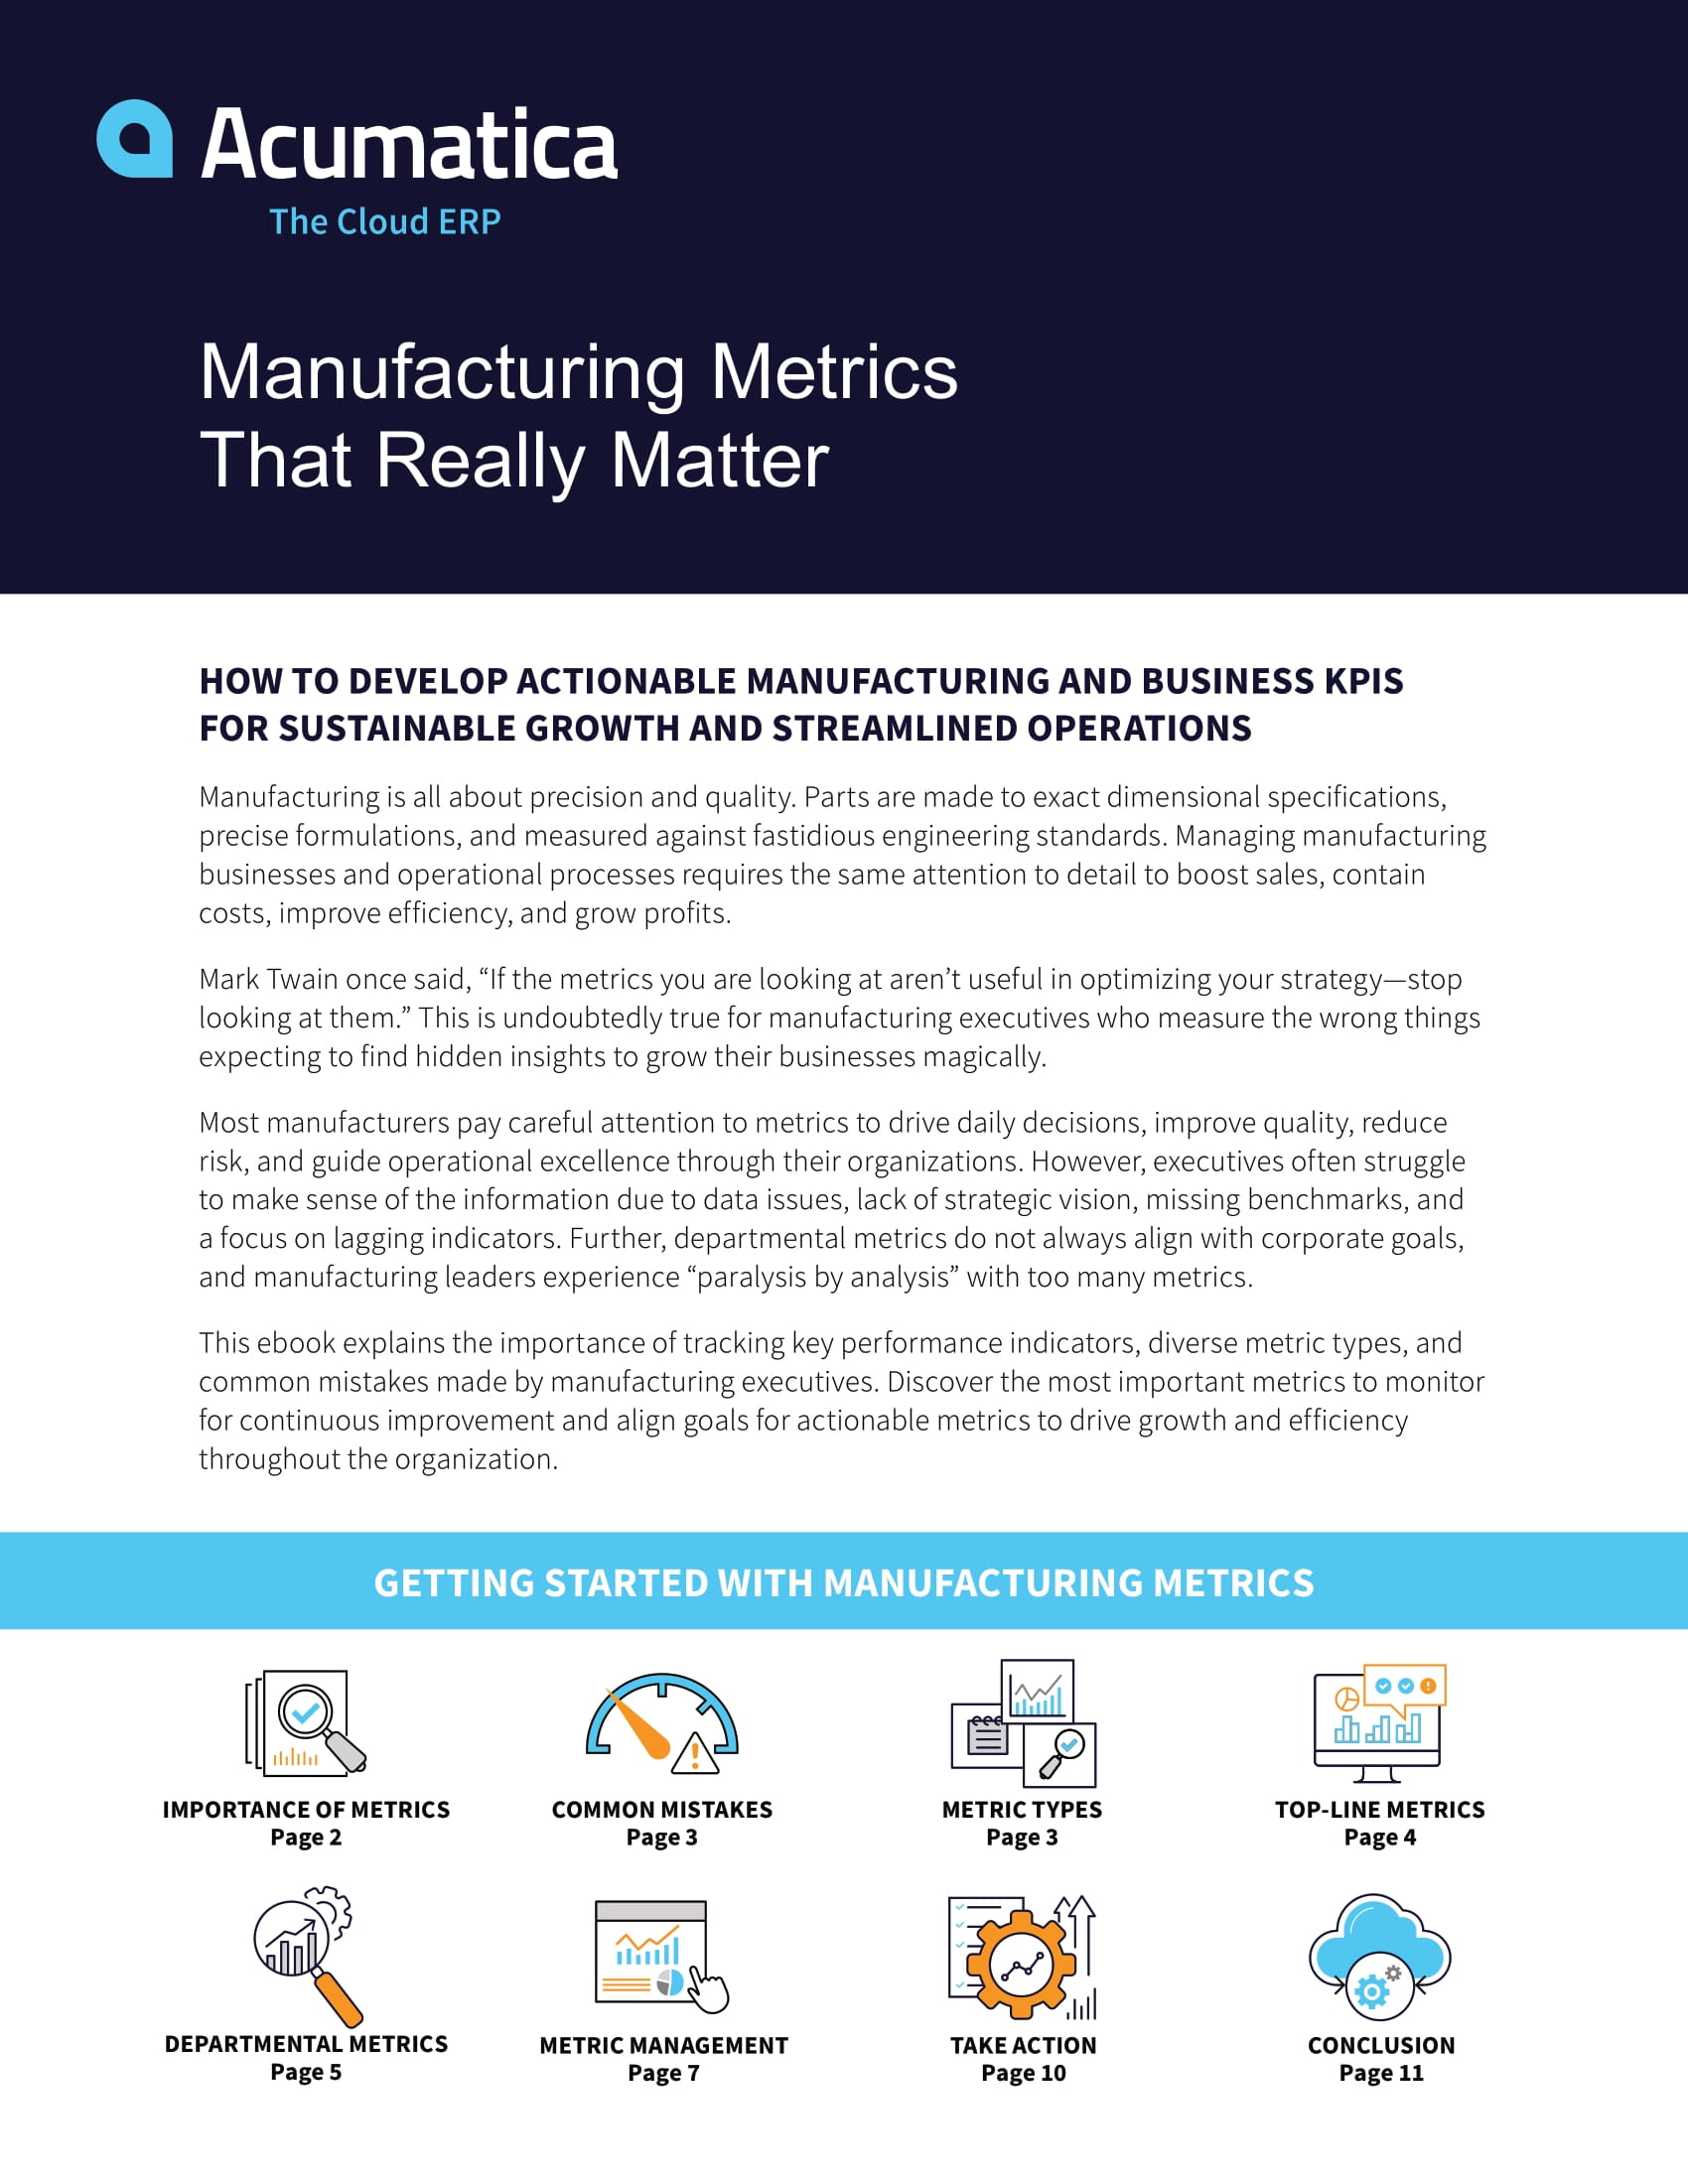 The Right Manufacturing Metrics For Efficiency and Growth